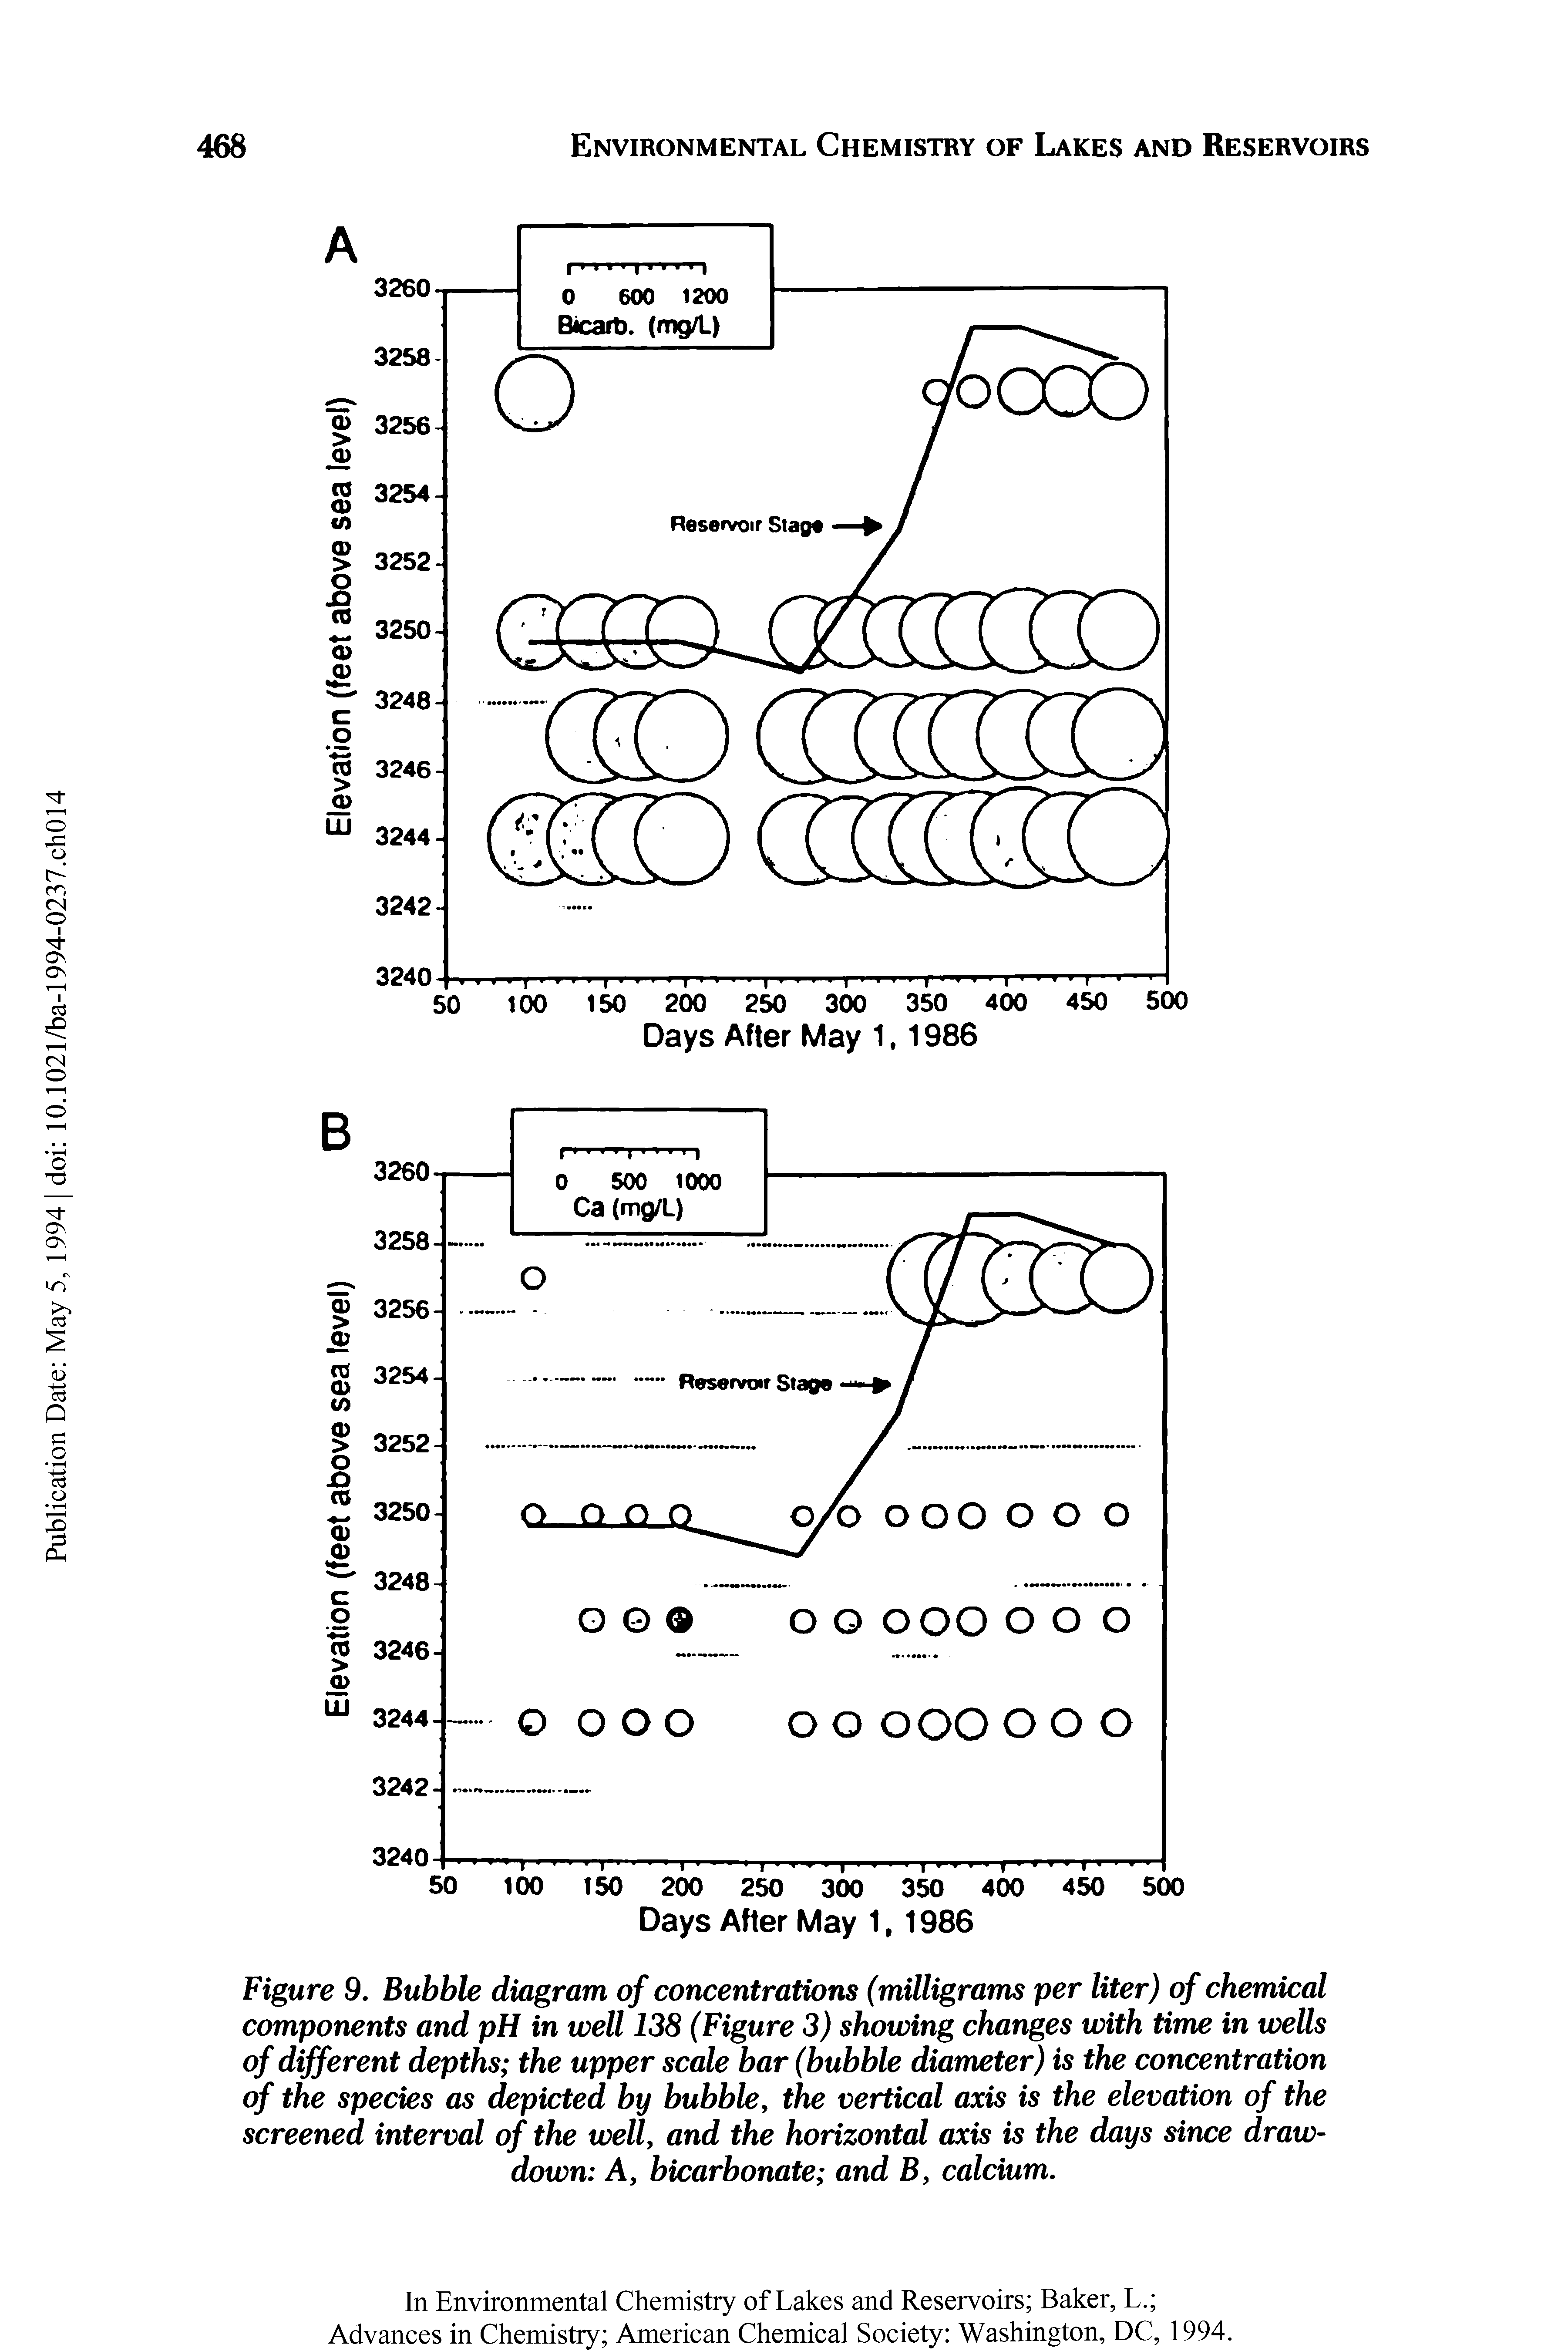 Figure 9. Bubble diagram of concentrations (milligrams per liter) of chemical components and pH in well 138 (Figure 3) showing changes with time in wells of different depths the upper scale bar (bubble diameter) is the concentration of the species as depicted by bubble, the vertical axis is the elevation of the screened interval of the well, and the horizontal axis is the days since drawdown A, bicarbonate and B, calcium.